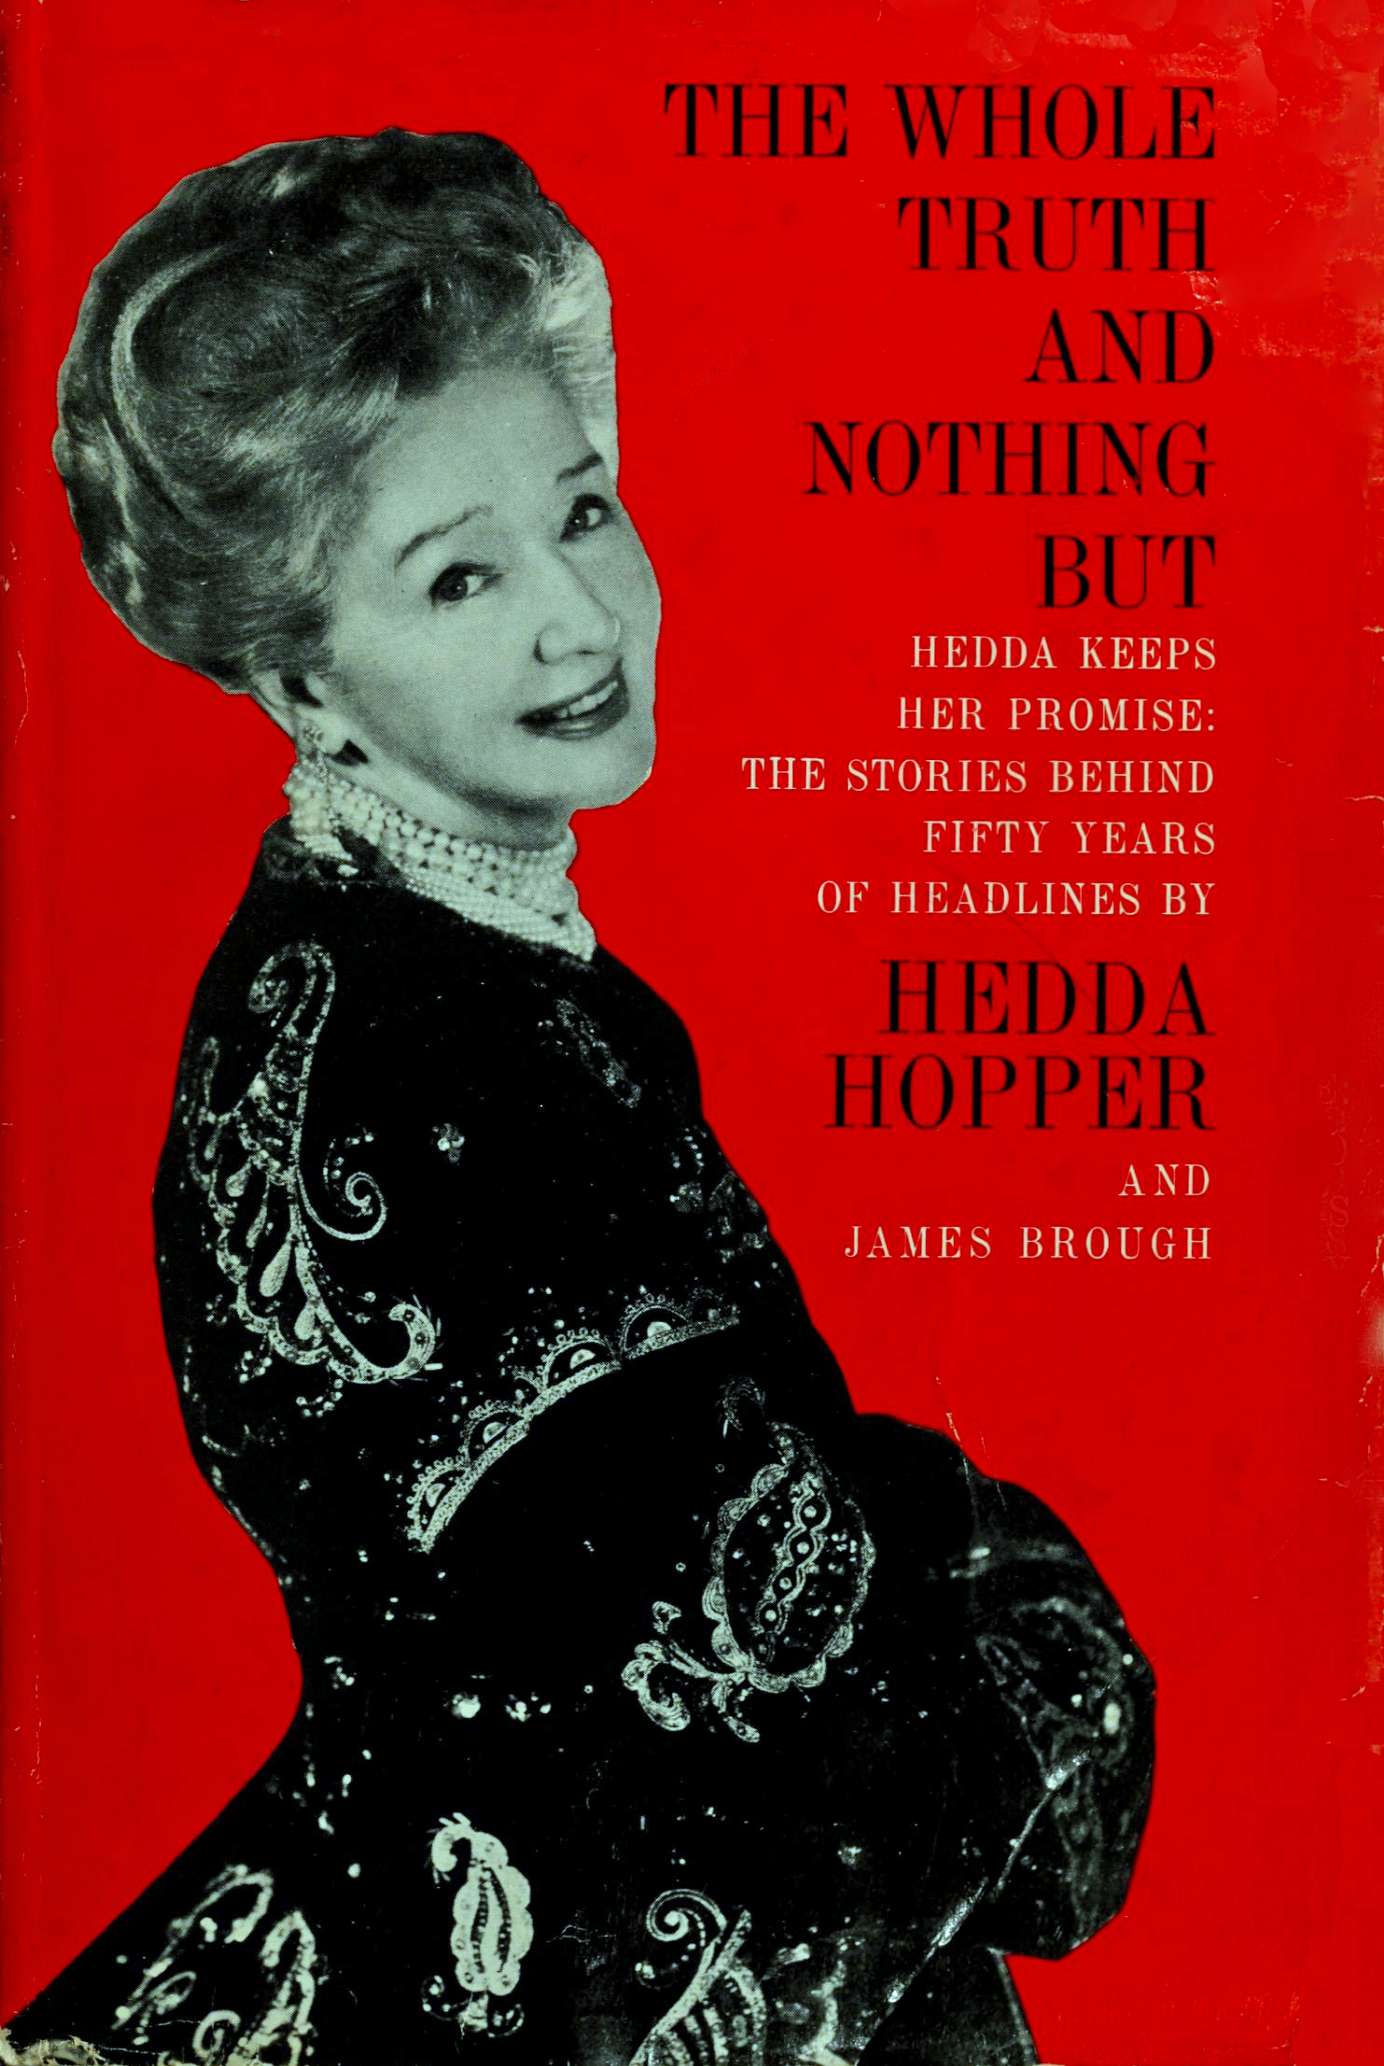 The Whole Truth And Nothing But, by Hedda Hopper and James Brough—A Project Gutenberg eBook image